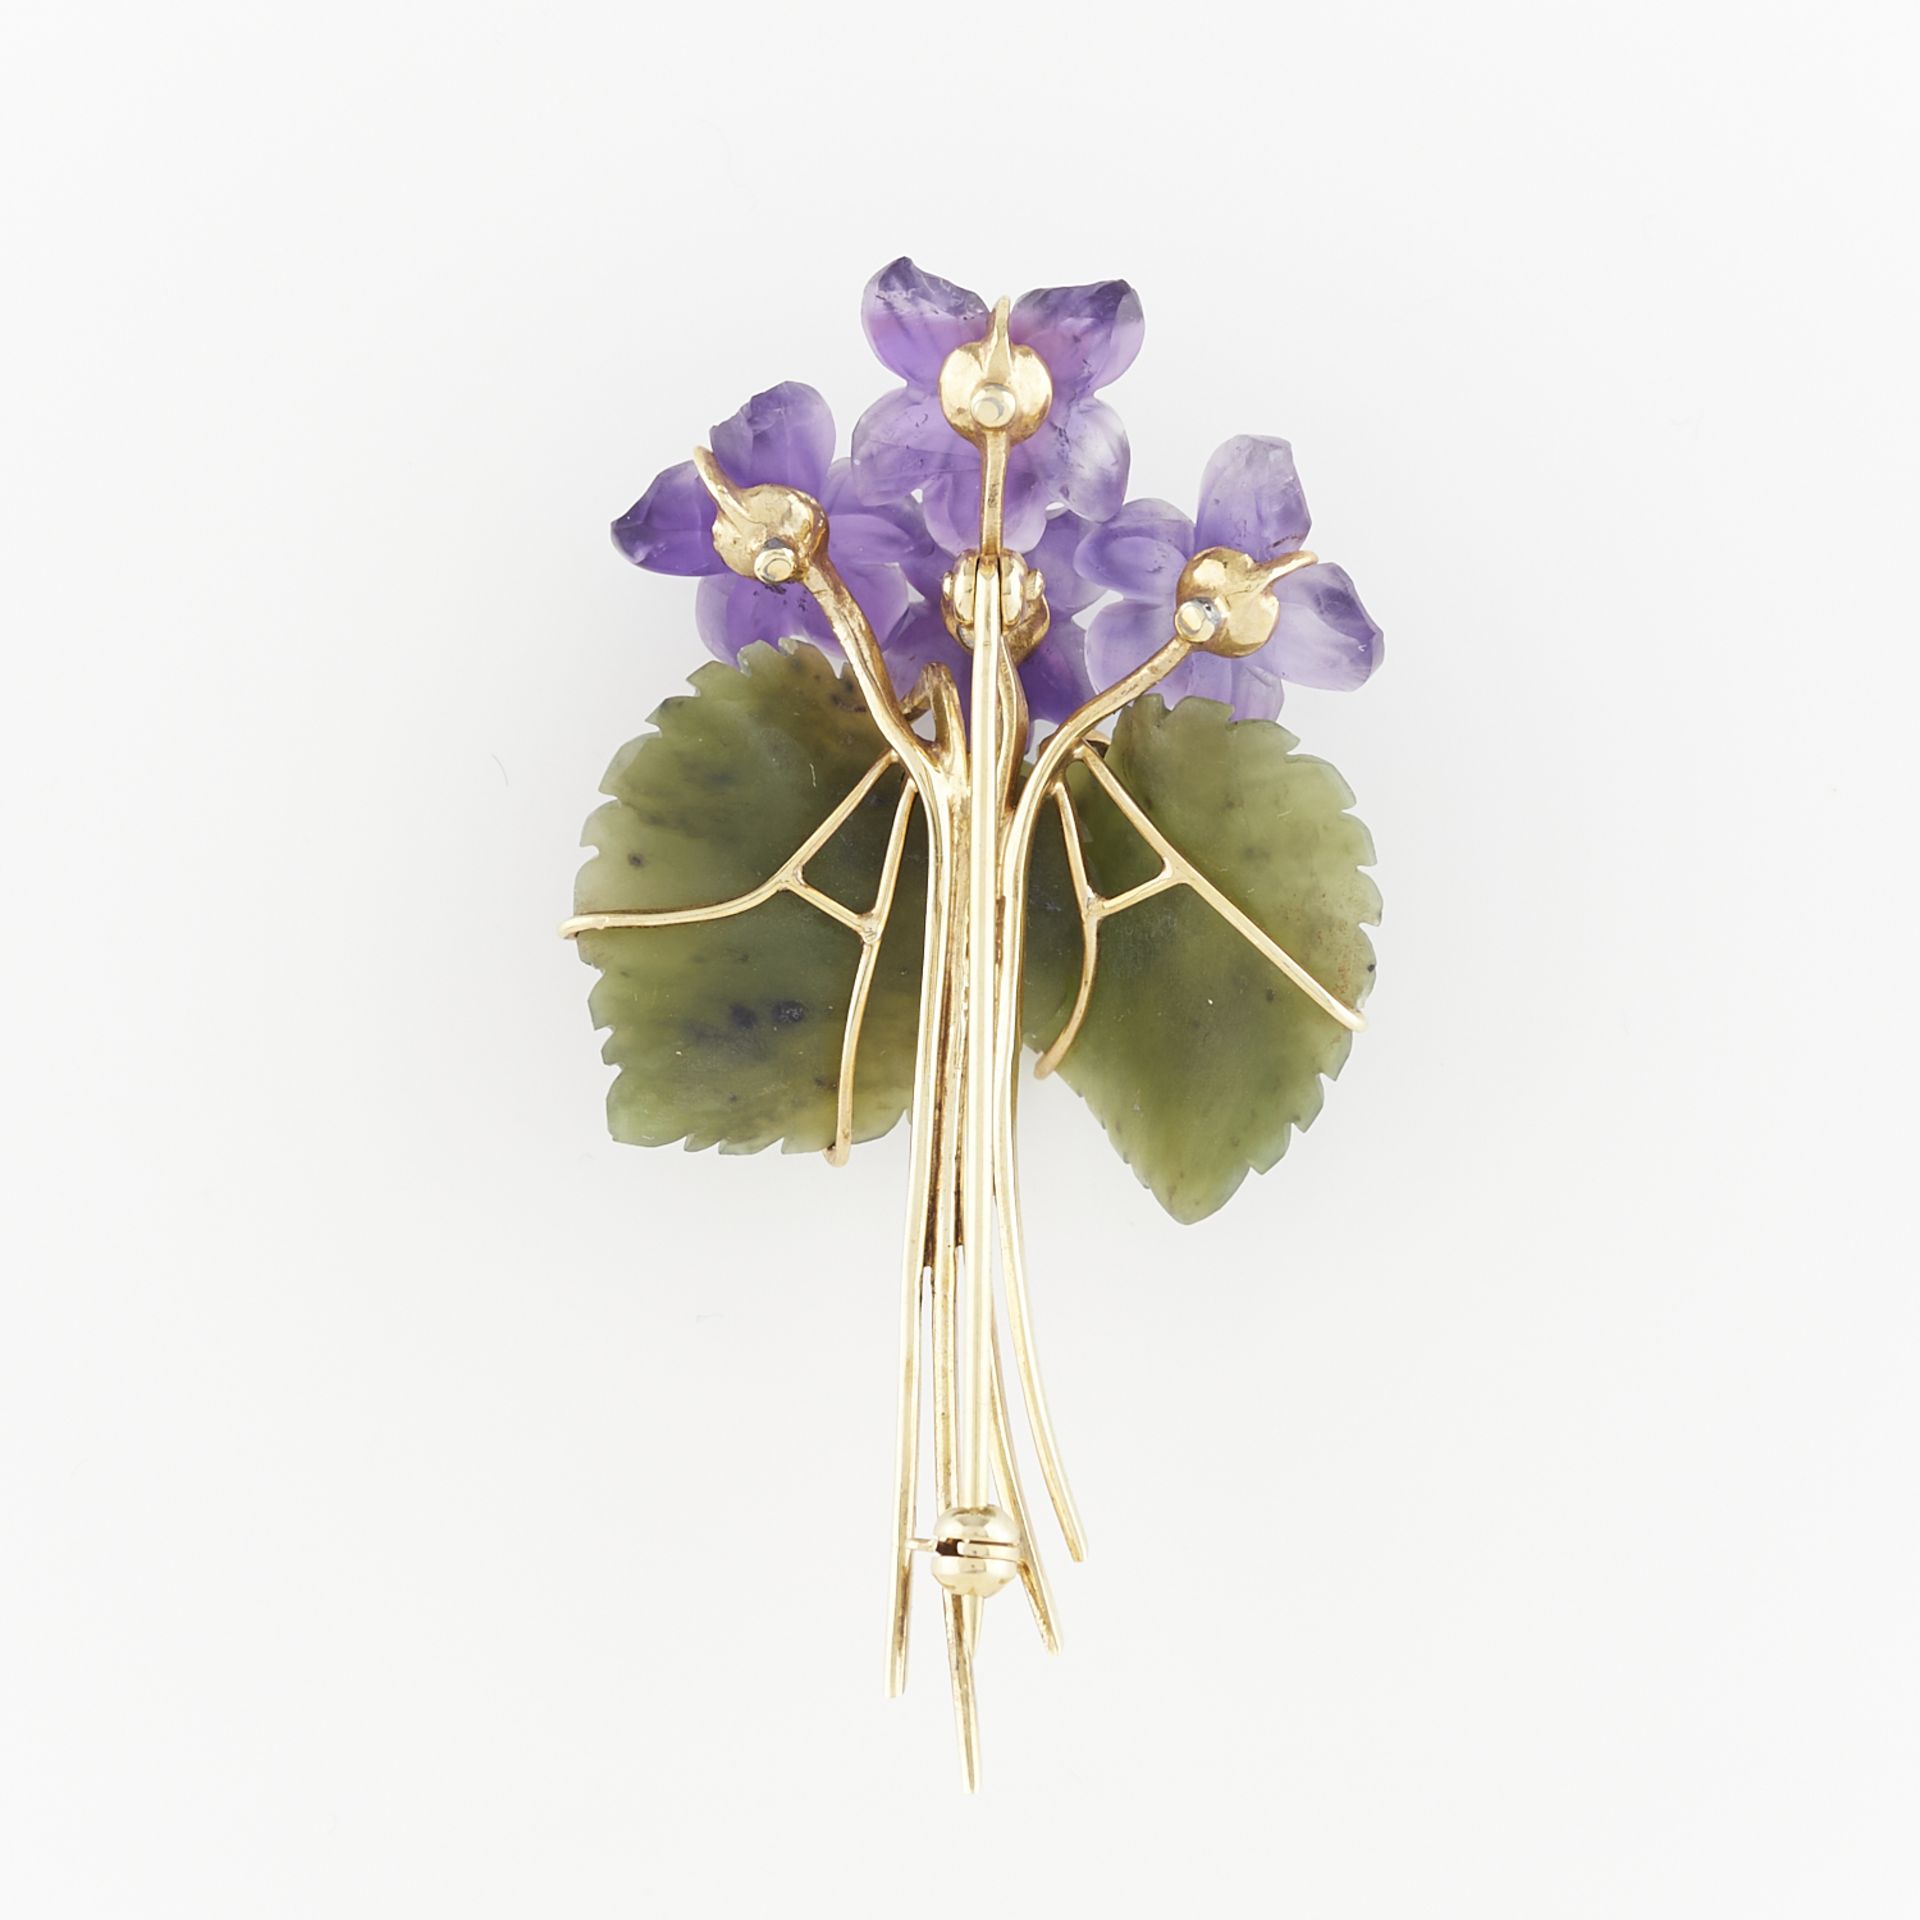 14k Yellow Gold Carved Violets Brooch - Image 3 of 6